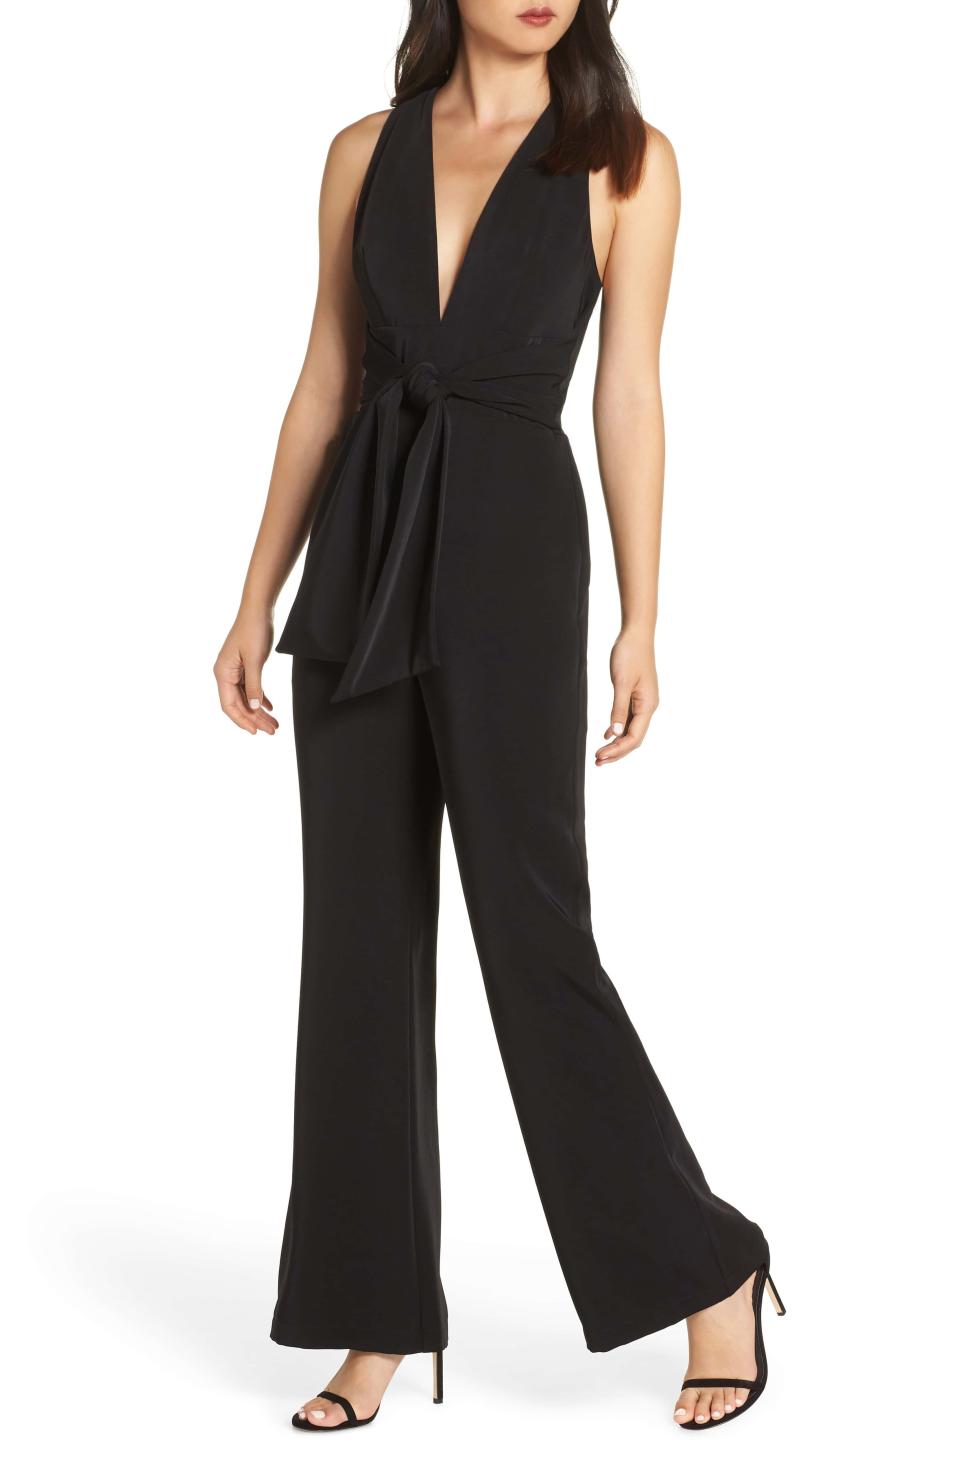 16) A Sophisticated Jumpsuit That'll Replace Your LBD